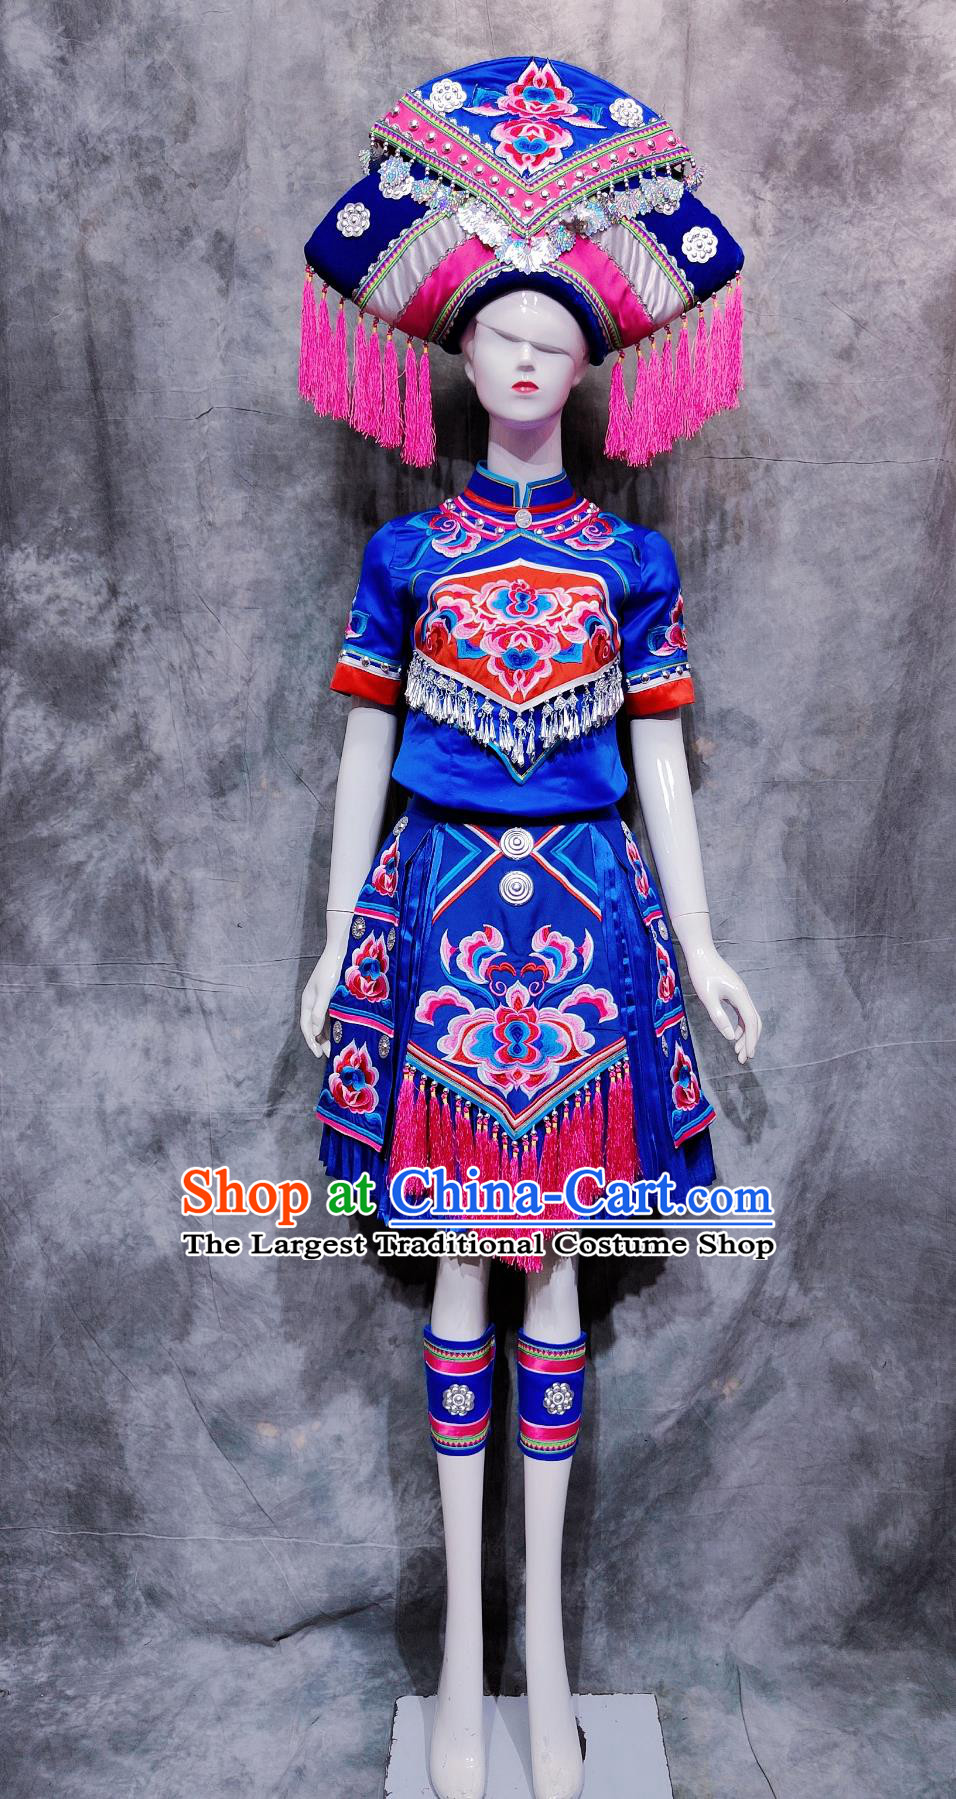 Traditional Guangxi Travel Embroidered Blue Dress Chinese Ethnic Dance Costume China Zhuang National Minority Woman Festival Clothing